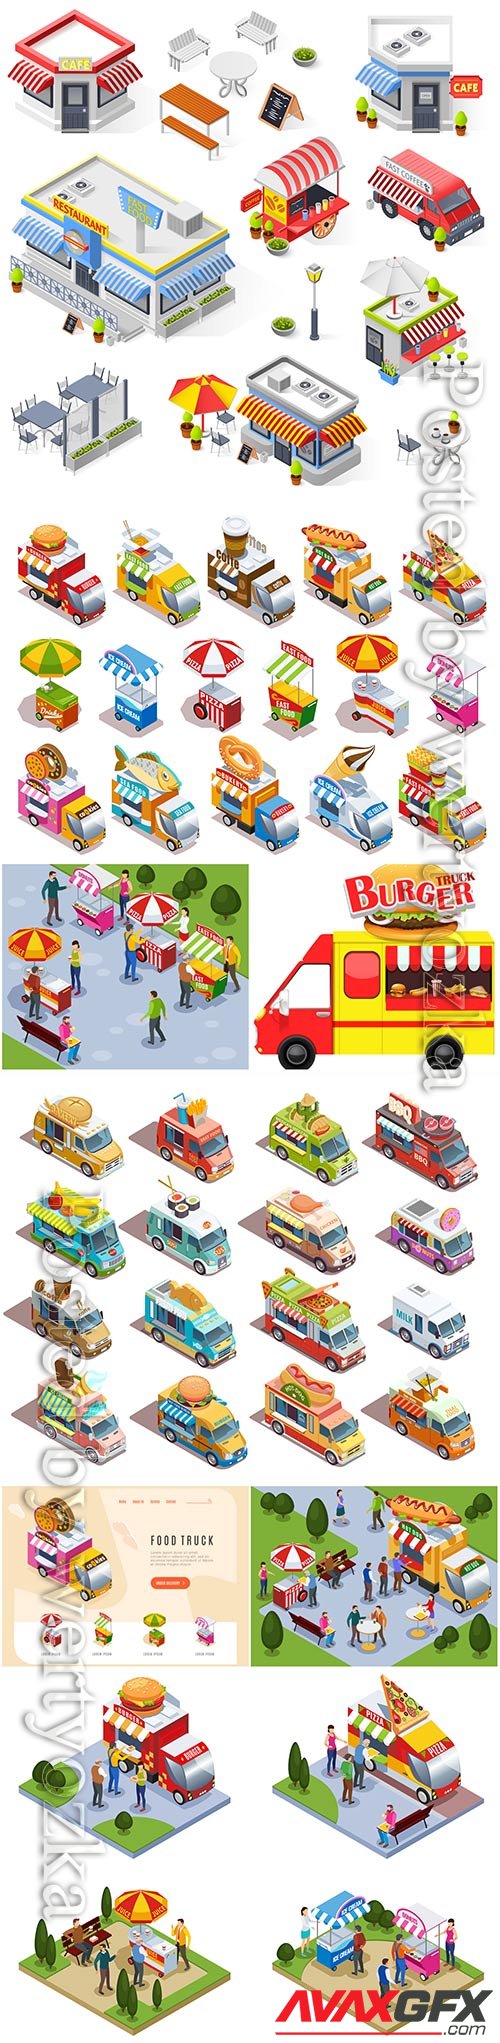 Food trucks and street carts vending fast food drinks and ice cream isometric icons set